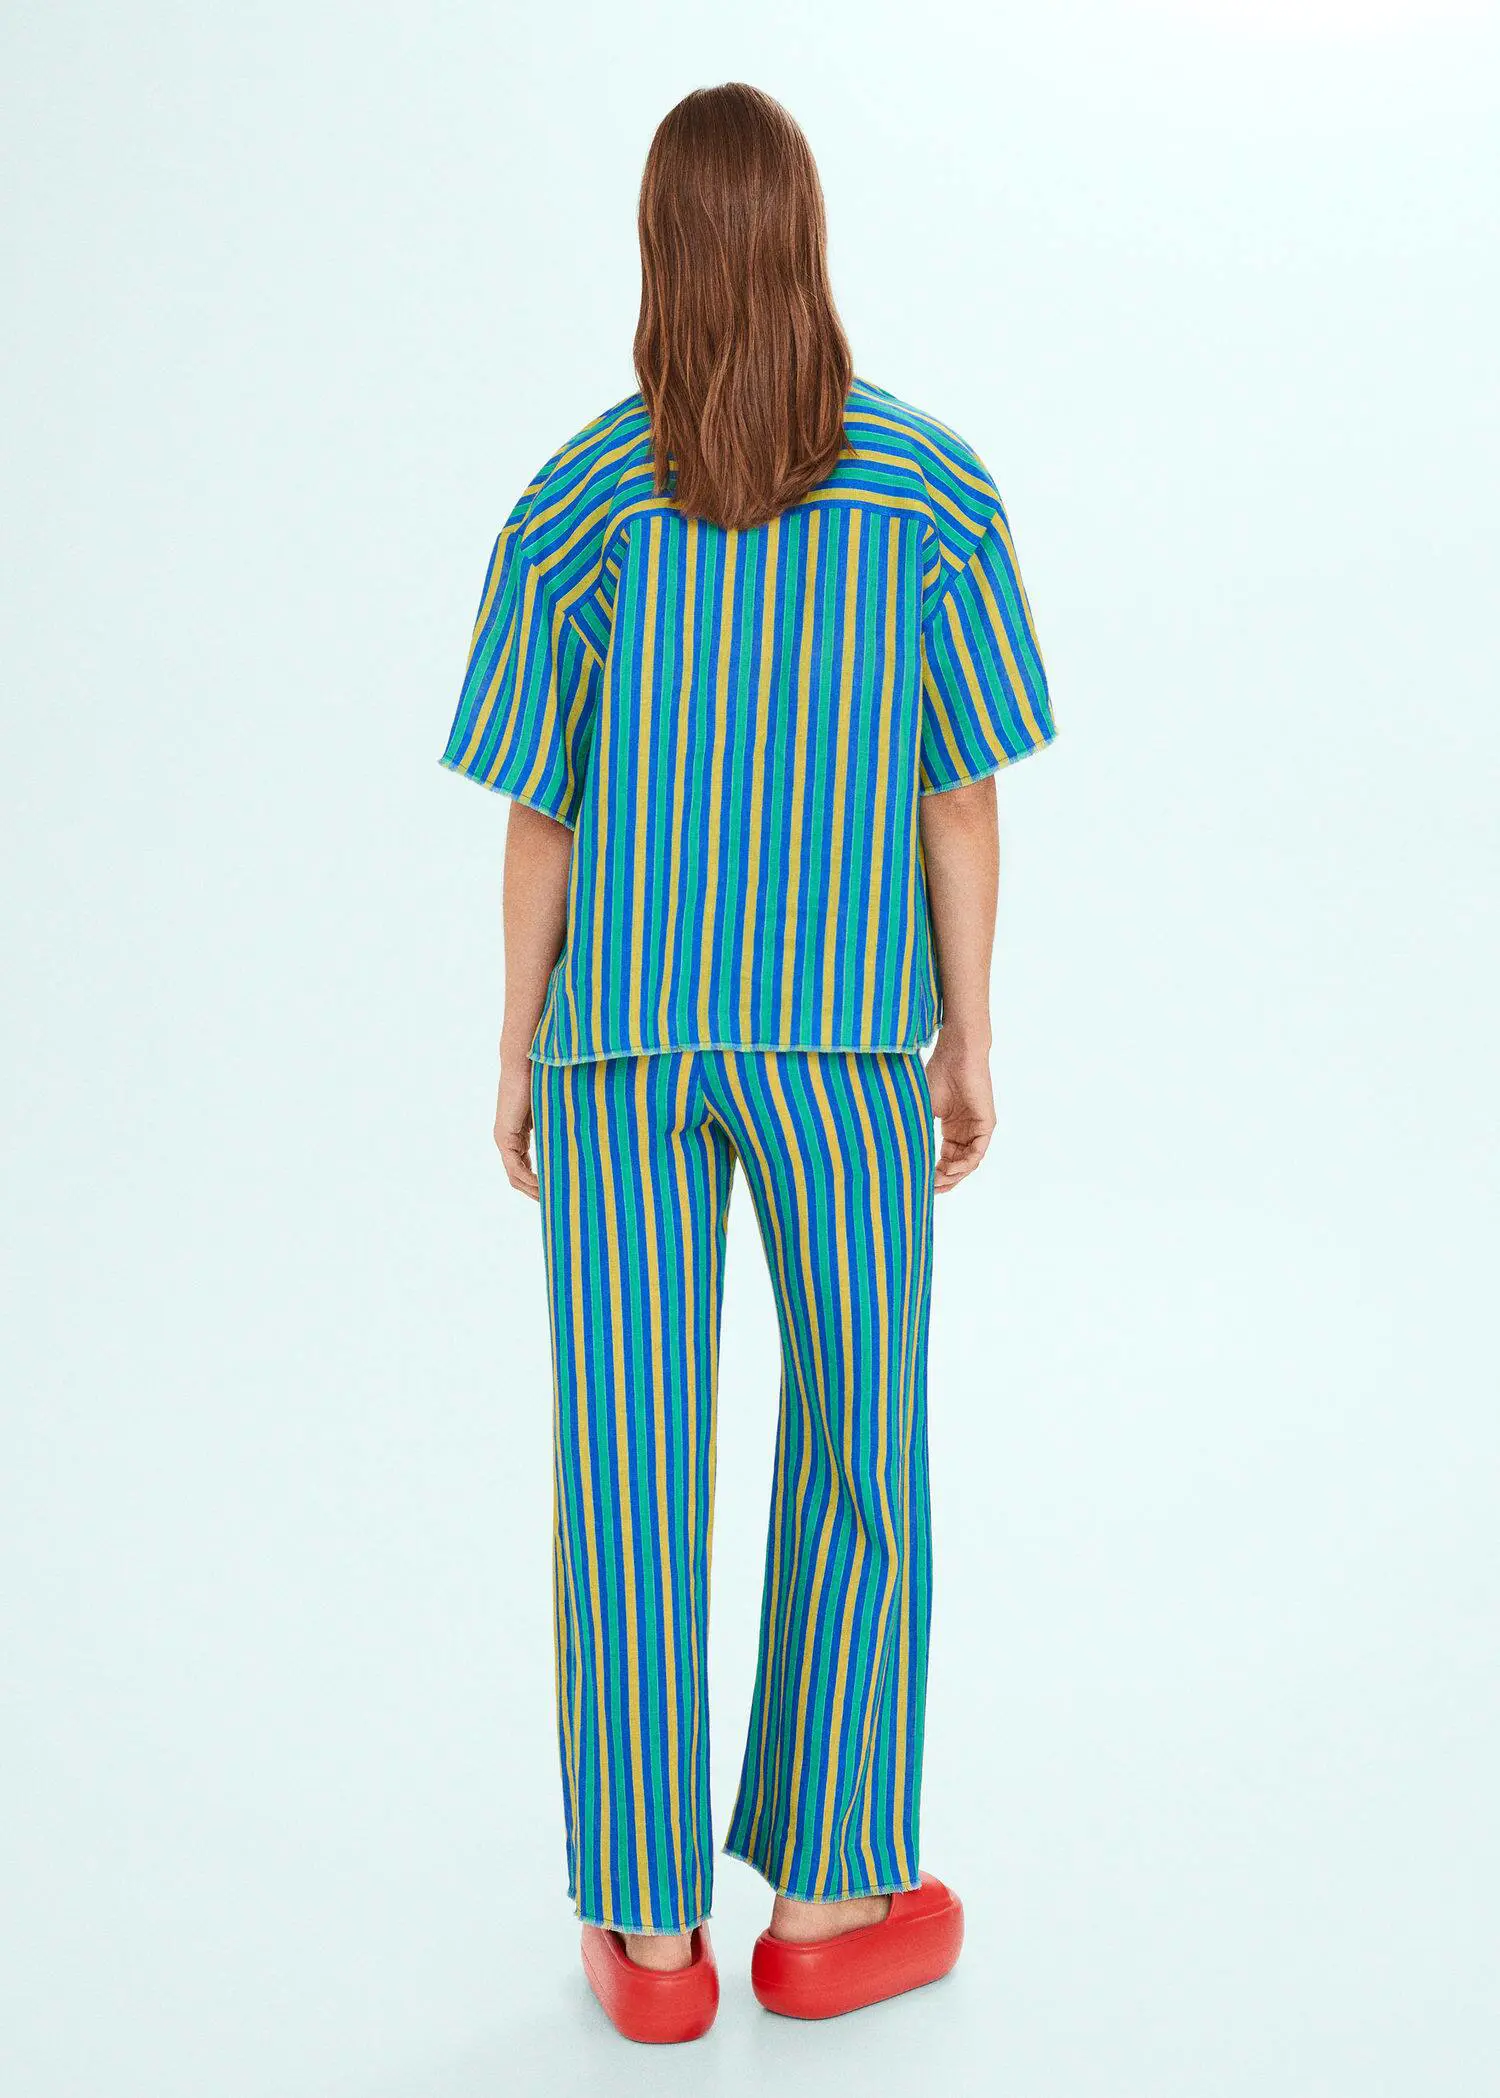 Mango Multi-colored striped linen pants. a person standing in front of a blue wall. 